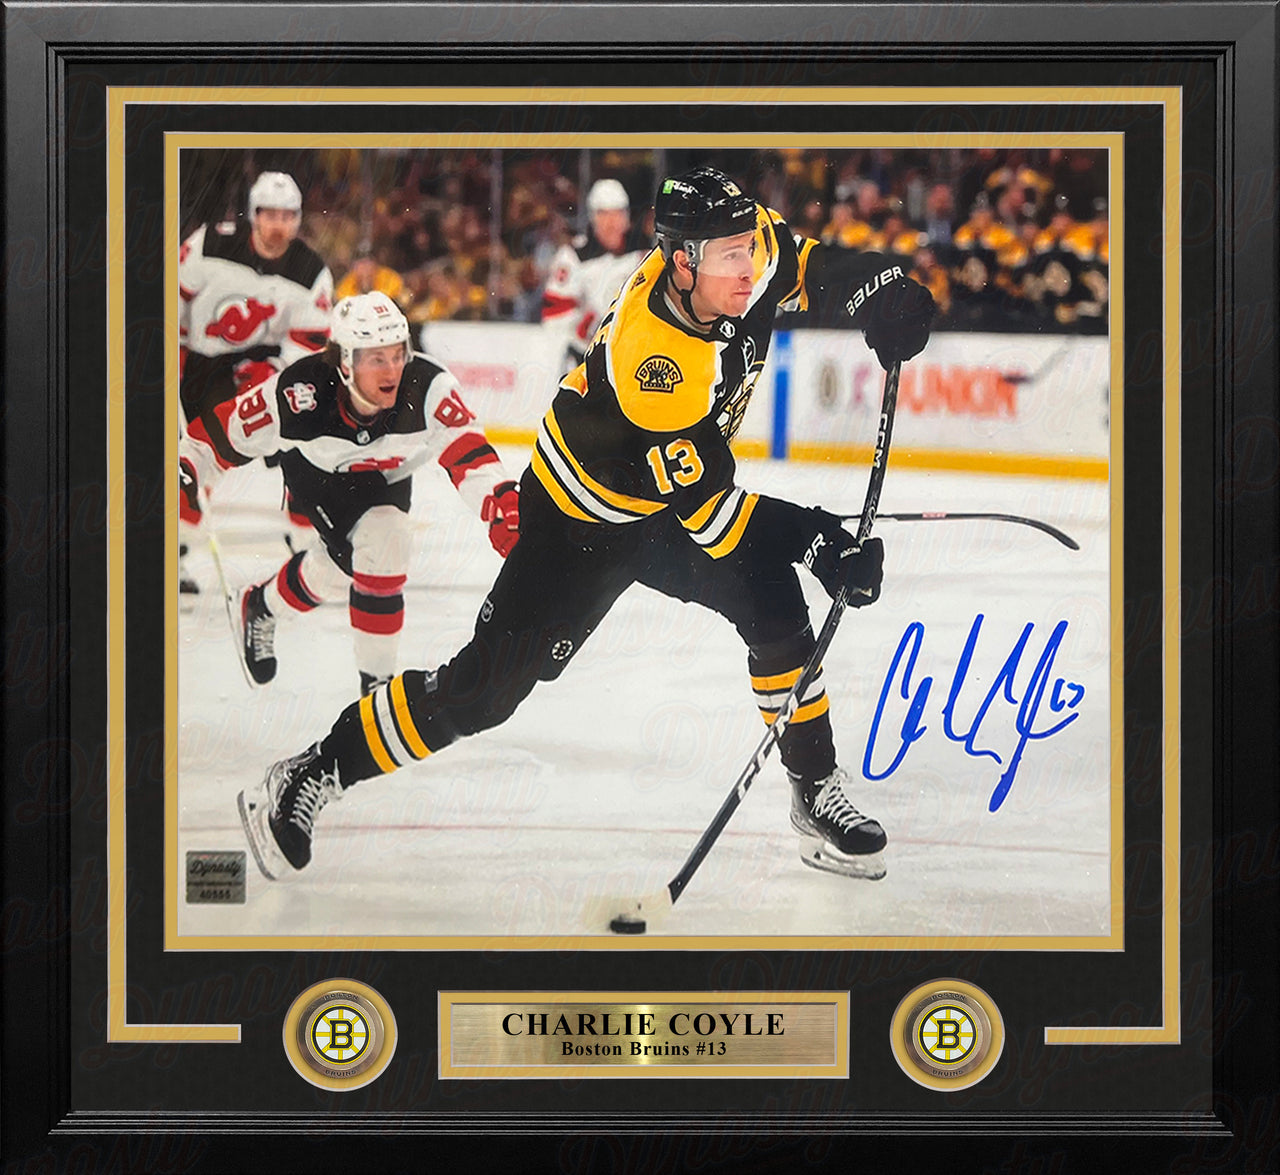 Charlie Coyle in Action Boston Bruins Autographed 16" x 20" Framed Hockey Photo